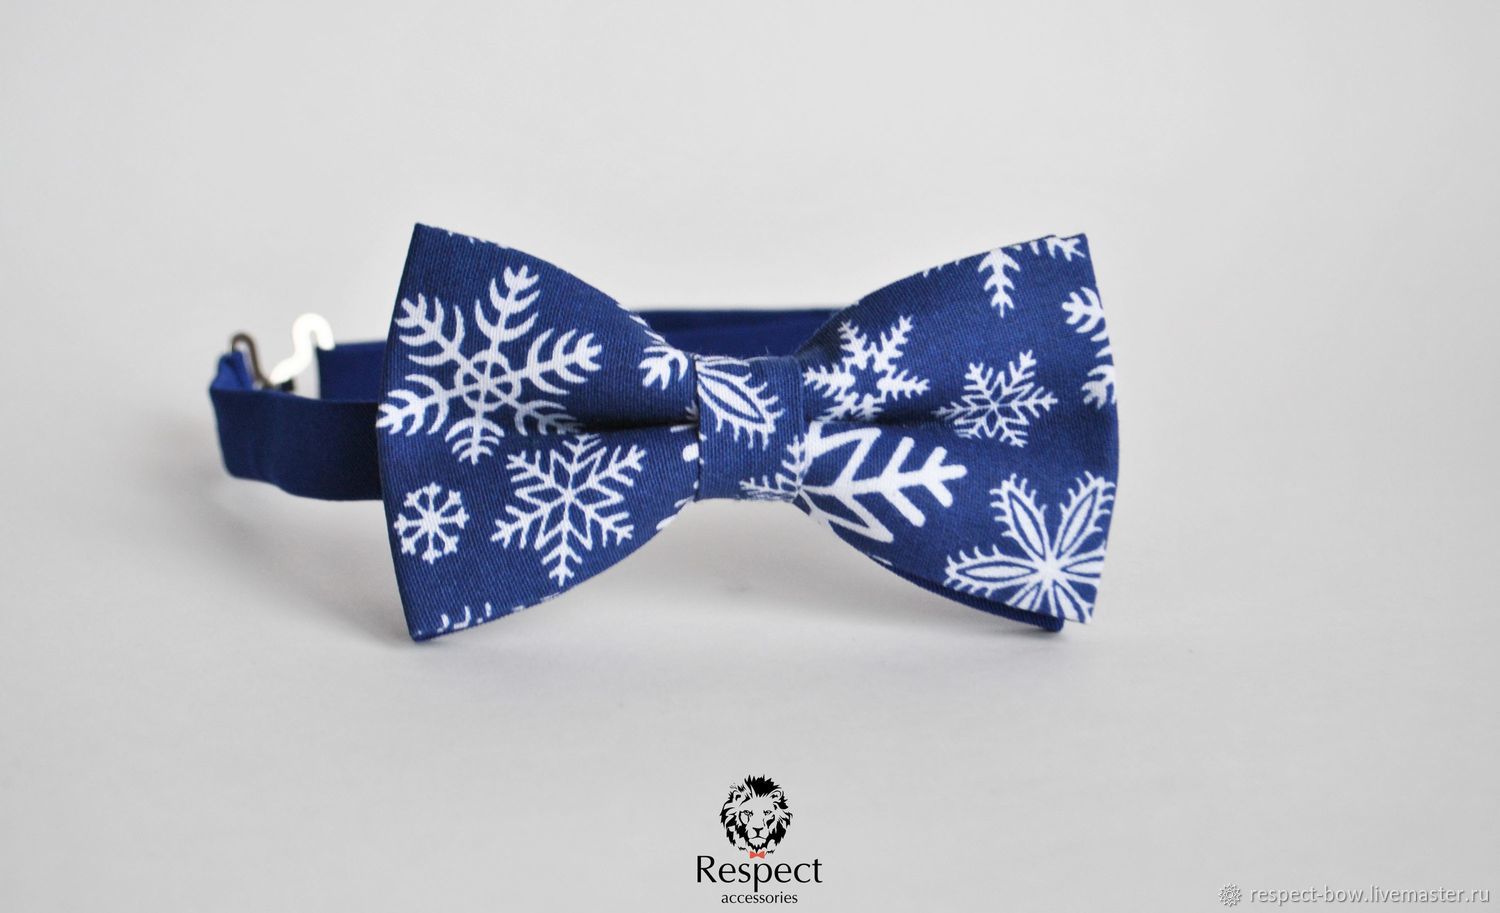 Blue butterfly tie with beautiful winter pattern Crystal Ice will be a wonderful gift for the new year for Your friends, family and loved ones.
